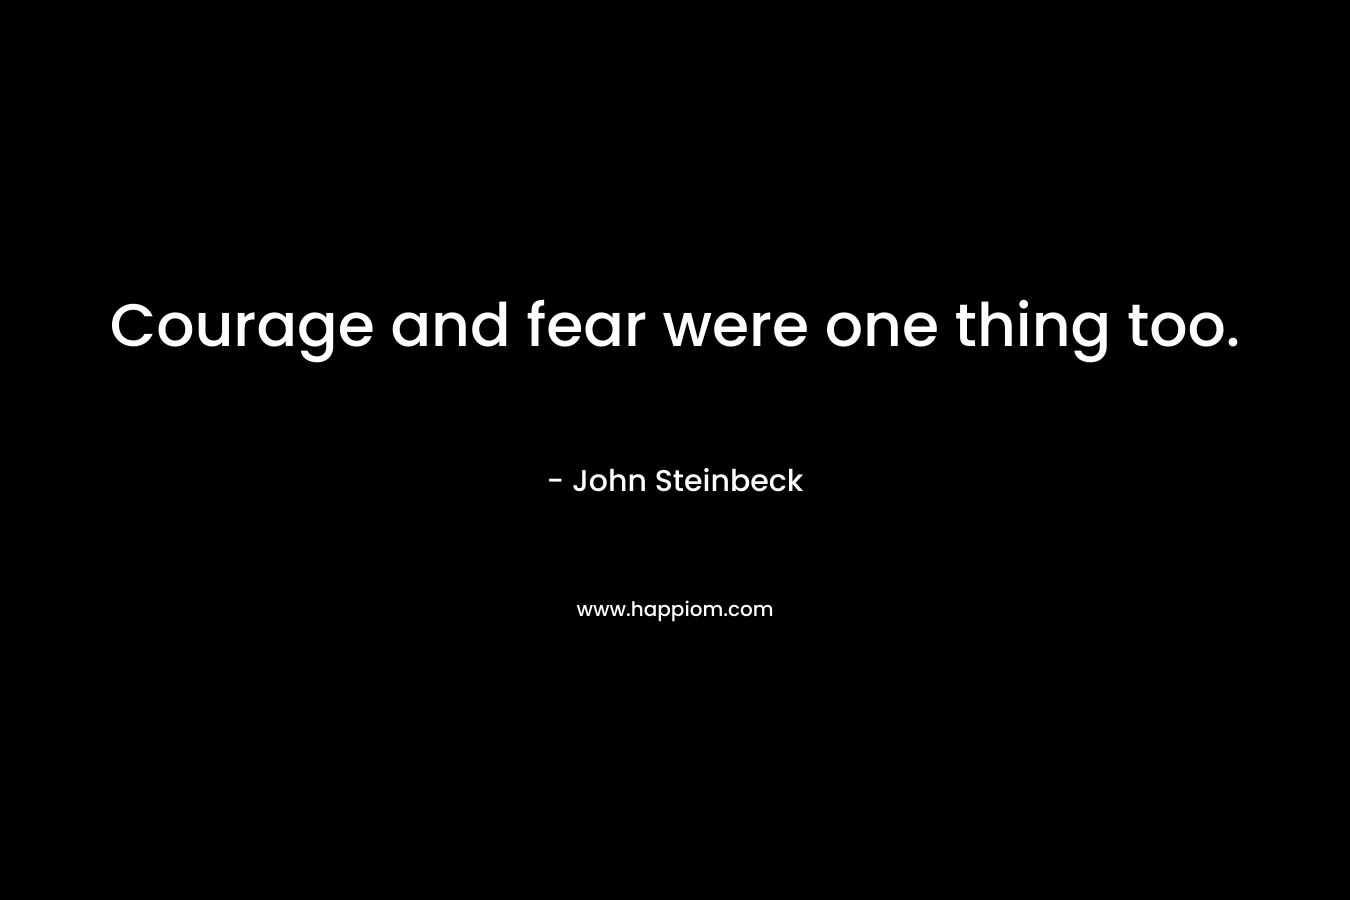 Courage and fear were one thing too.